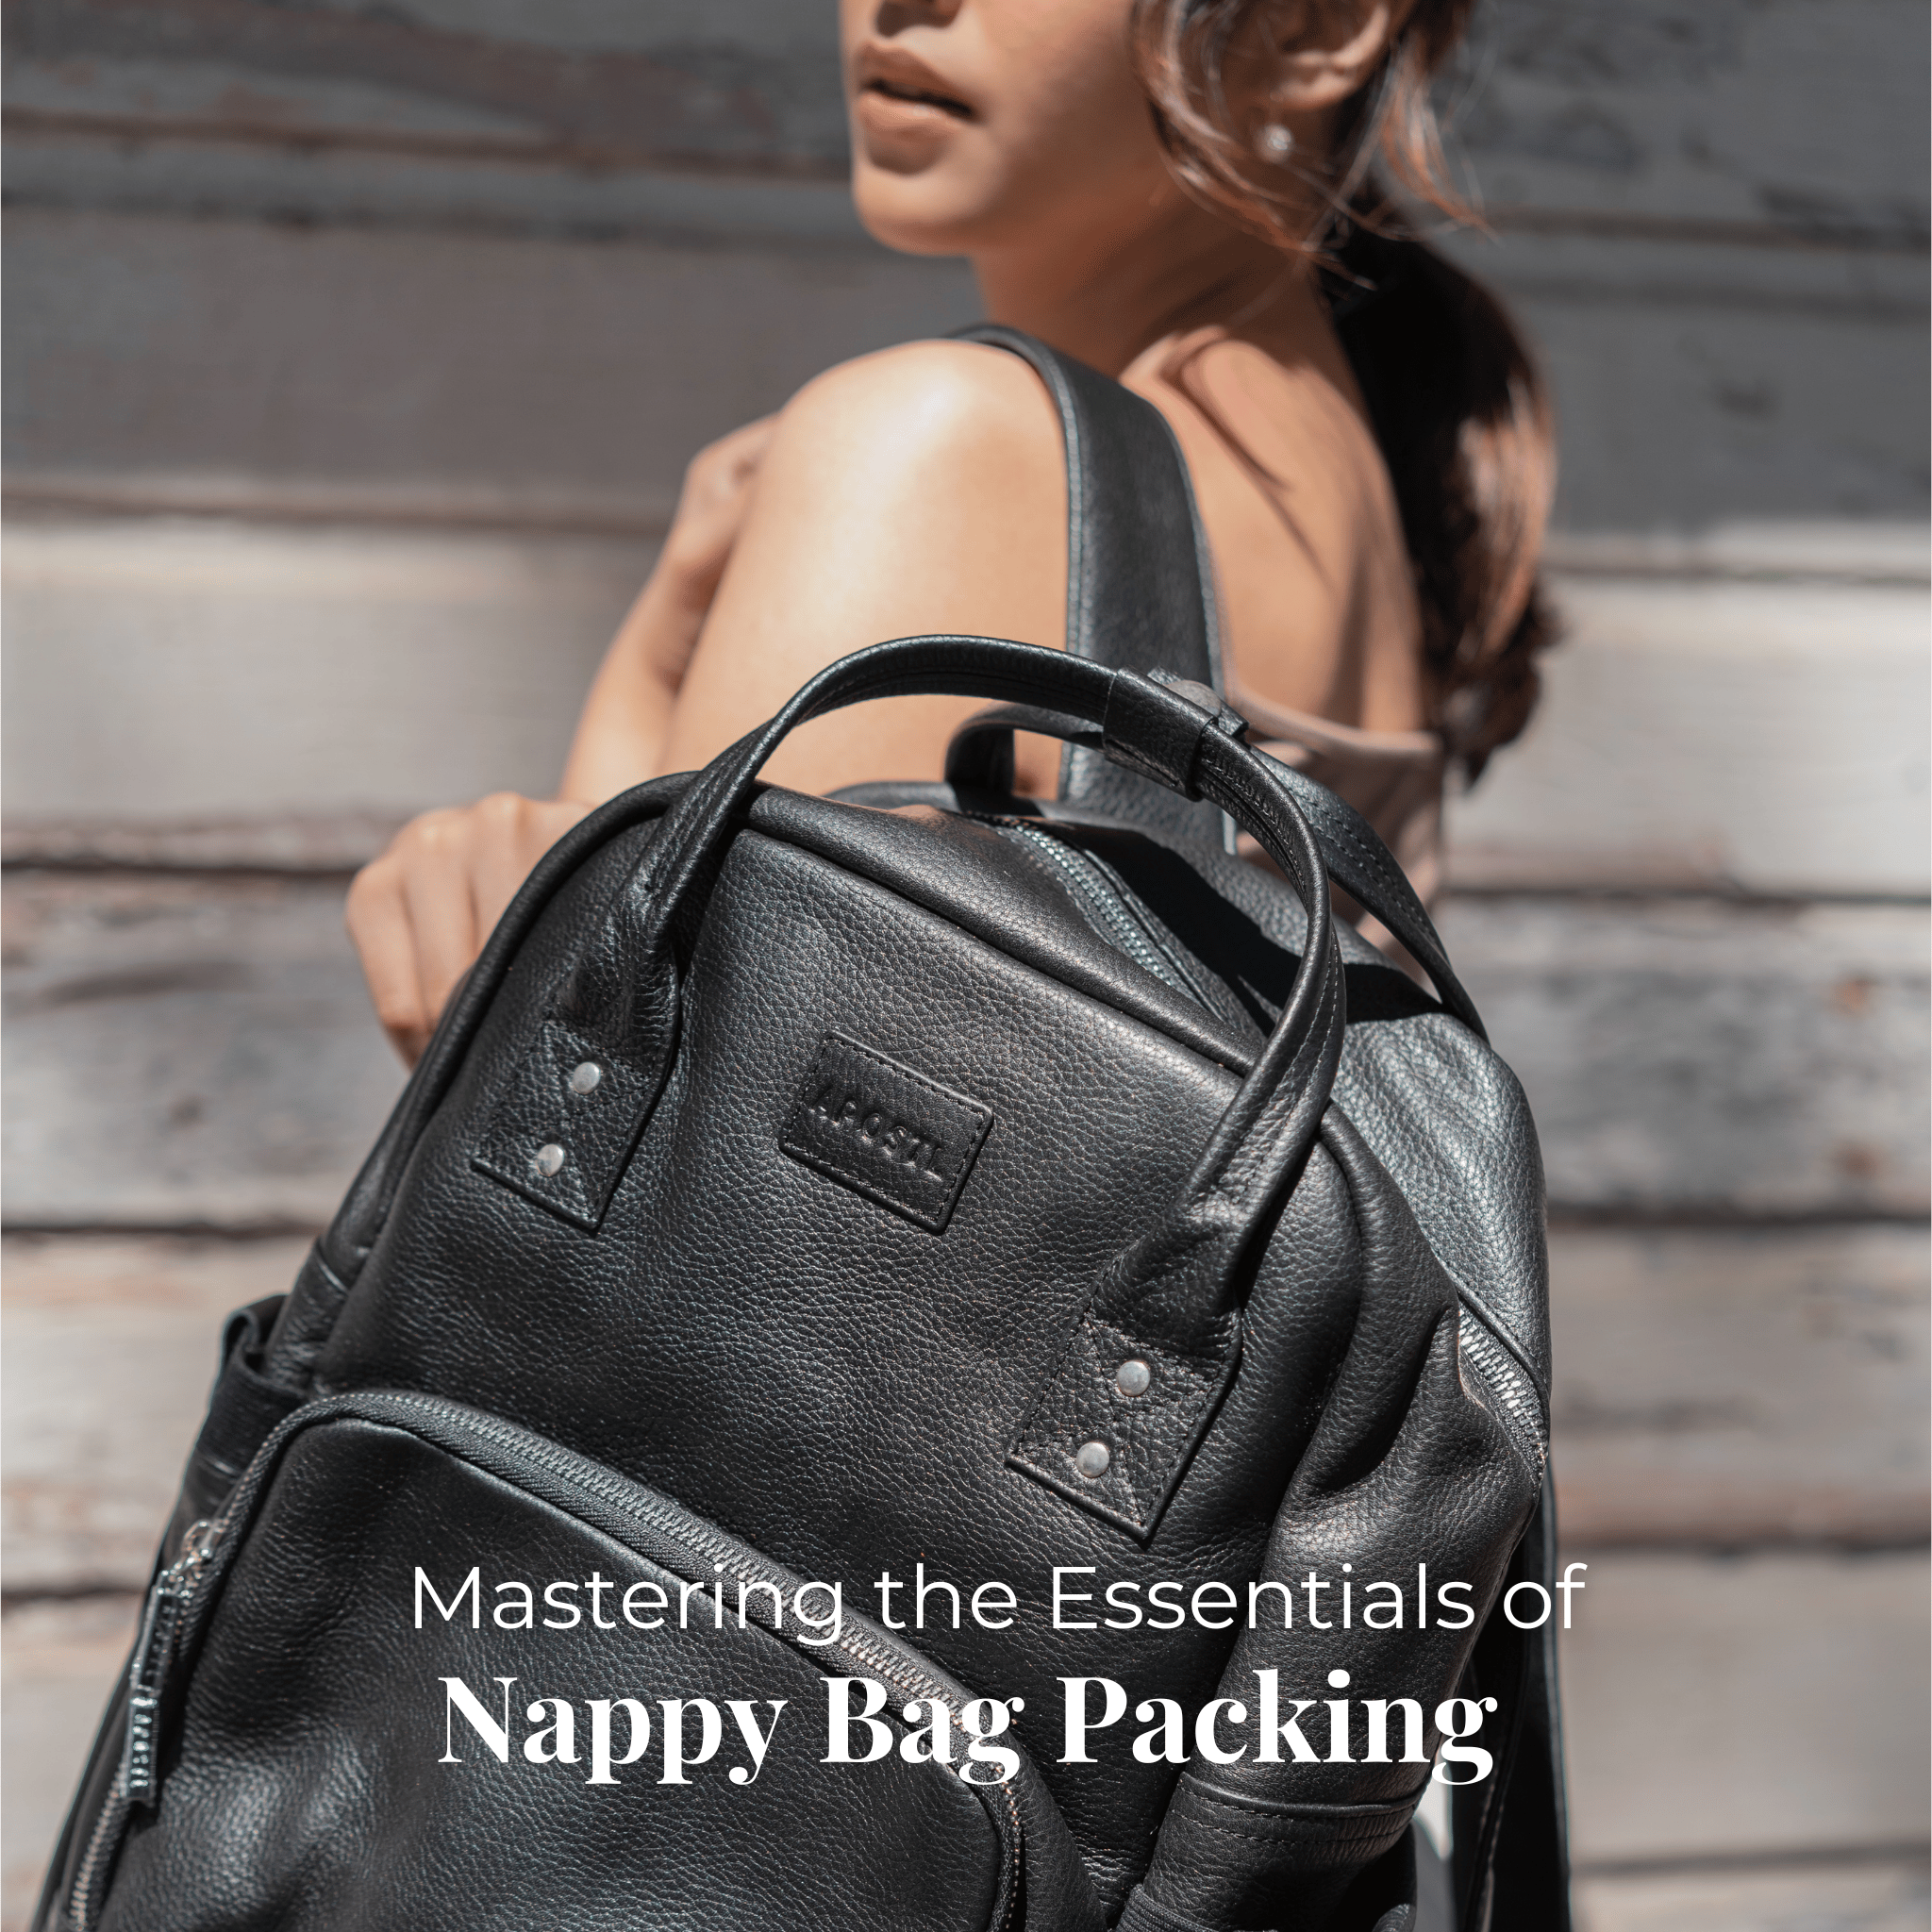 Mastering the Essentials of Nappy Bag Packing